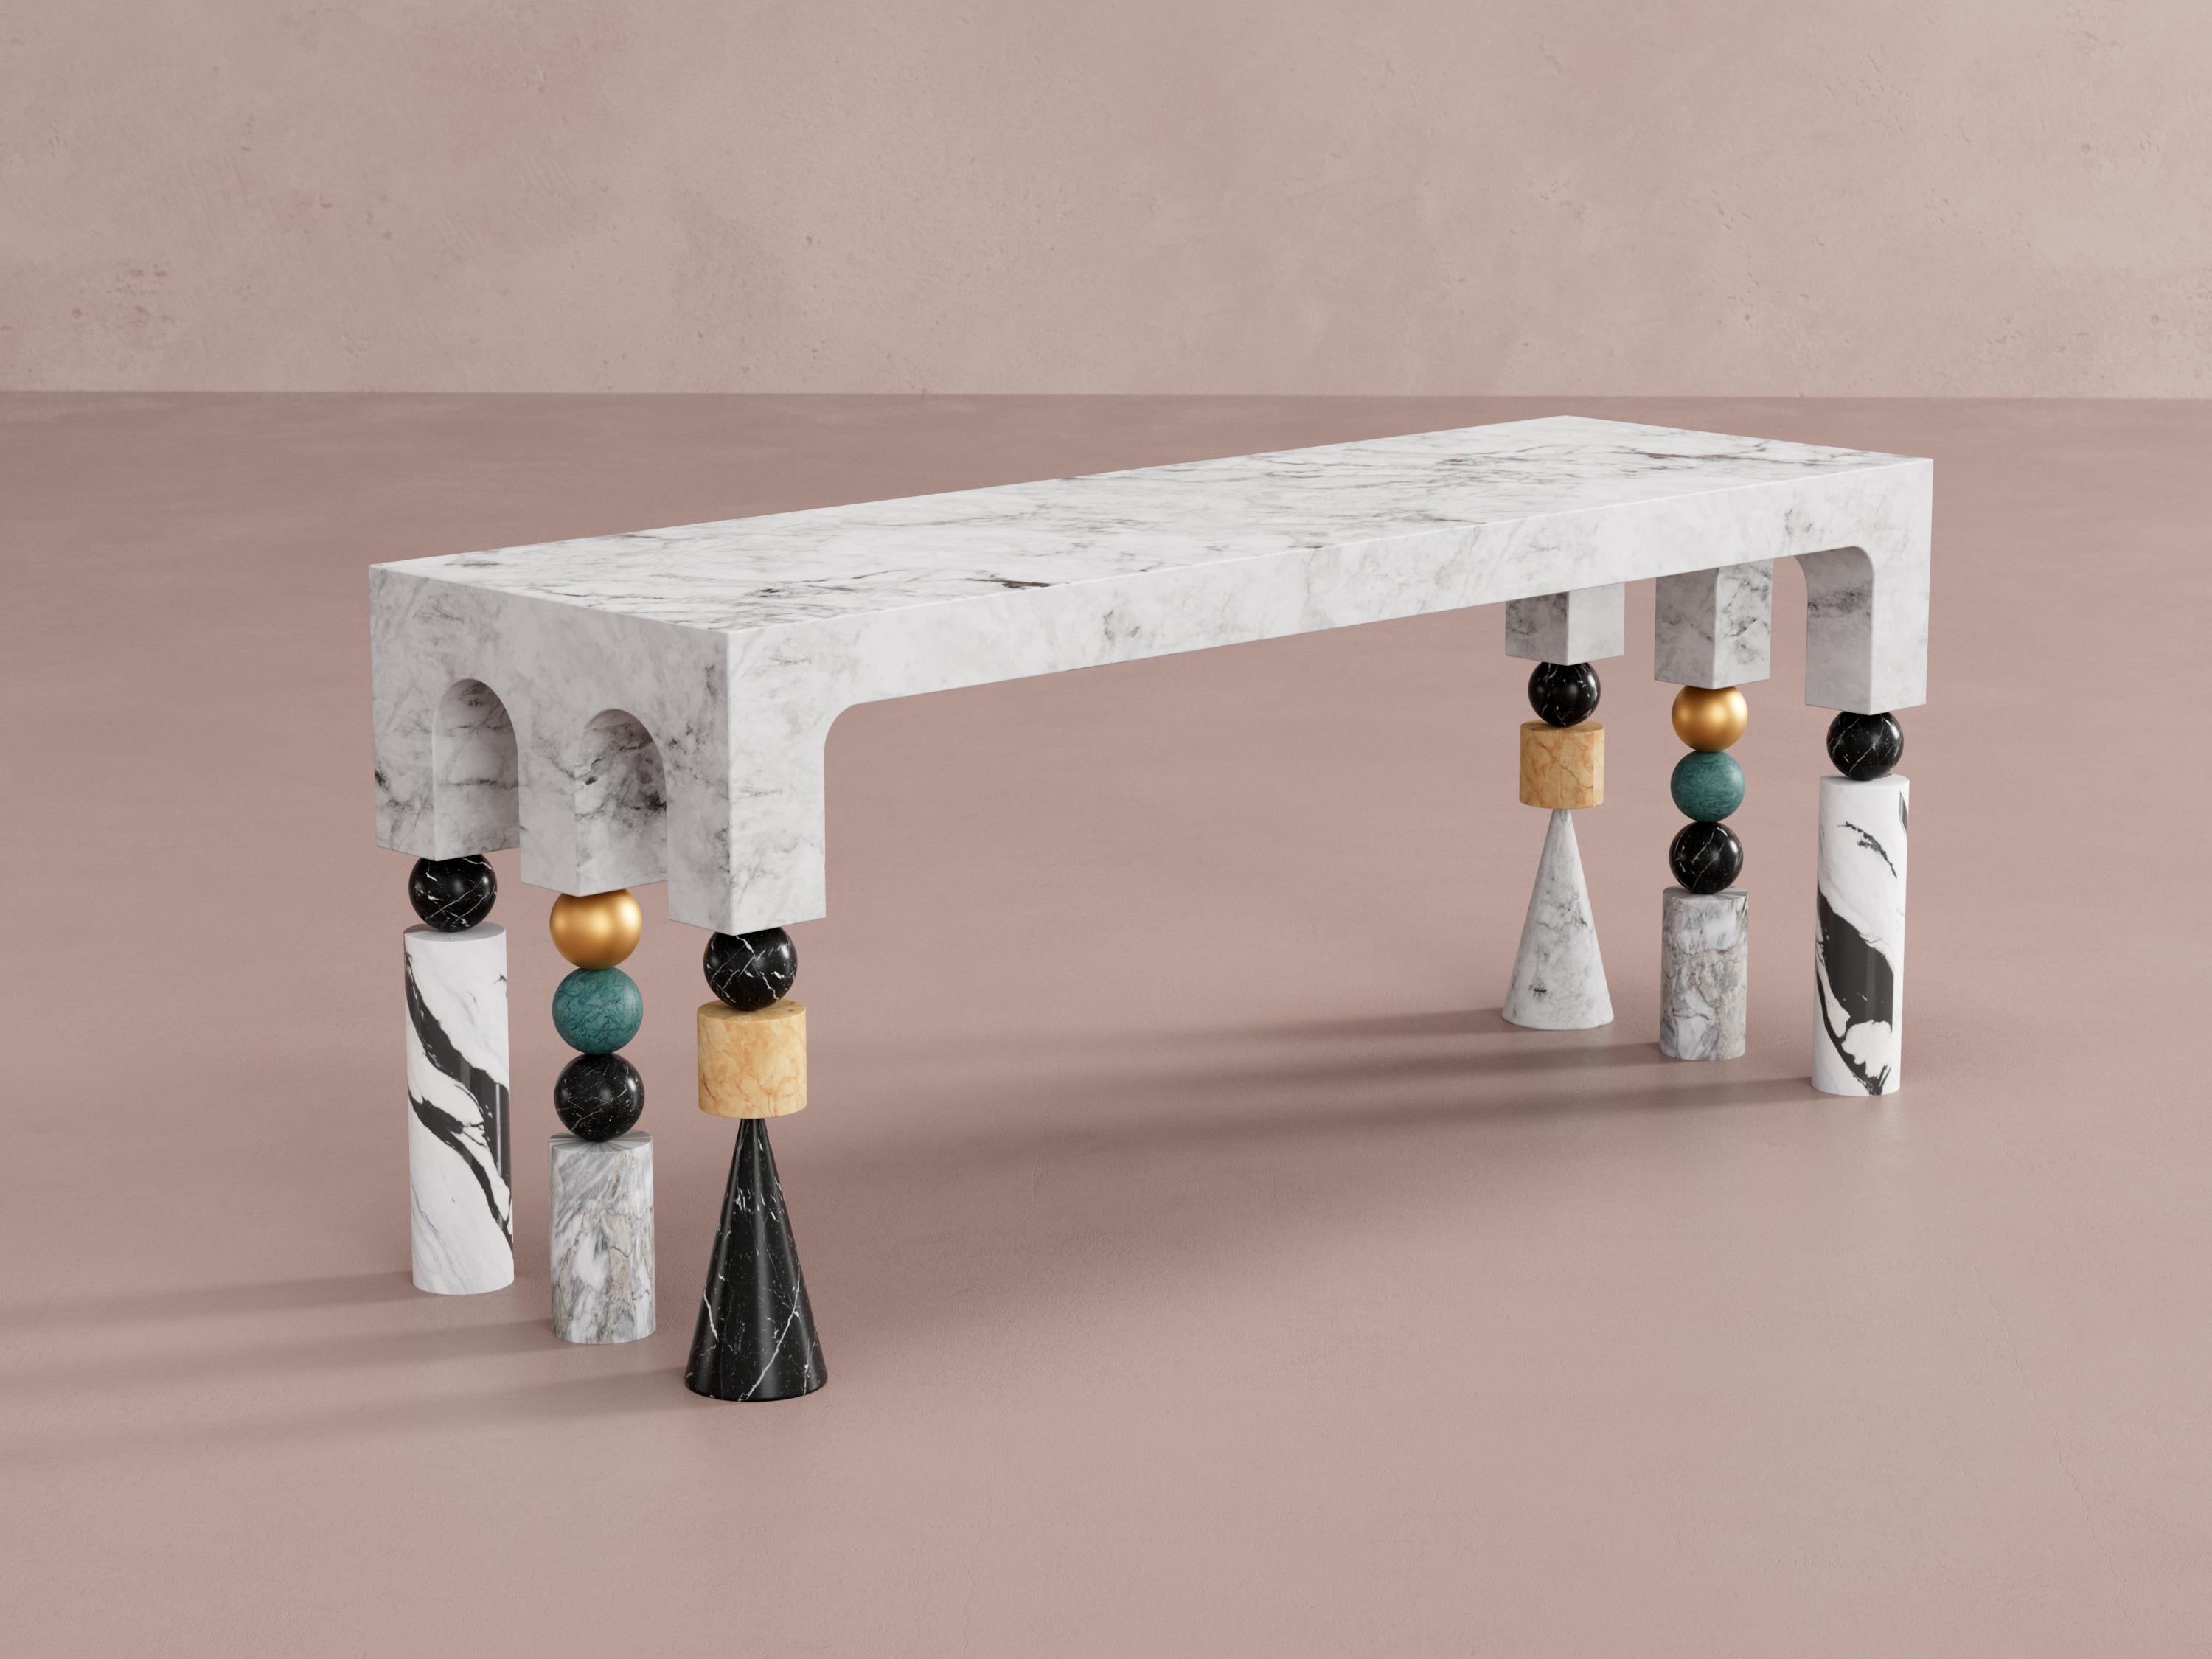 Portal desk by Pilar Zeta
One of a kind.
Materials: Marble, aluminium, brass, onyx.
Dimensions: W 167 x D 60 x H 75 cm.
Weight: 600 kg.

Marble, aluminium & brass white desk. Marble, onyx, brass and metal structure. 

Argentinian-born artist Pilar